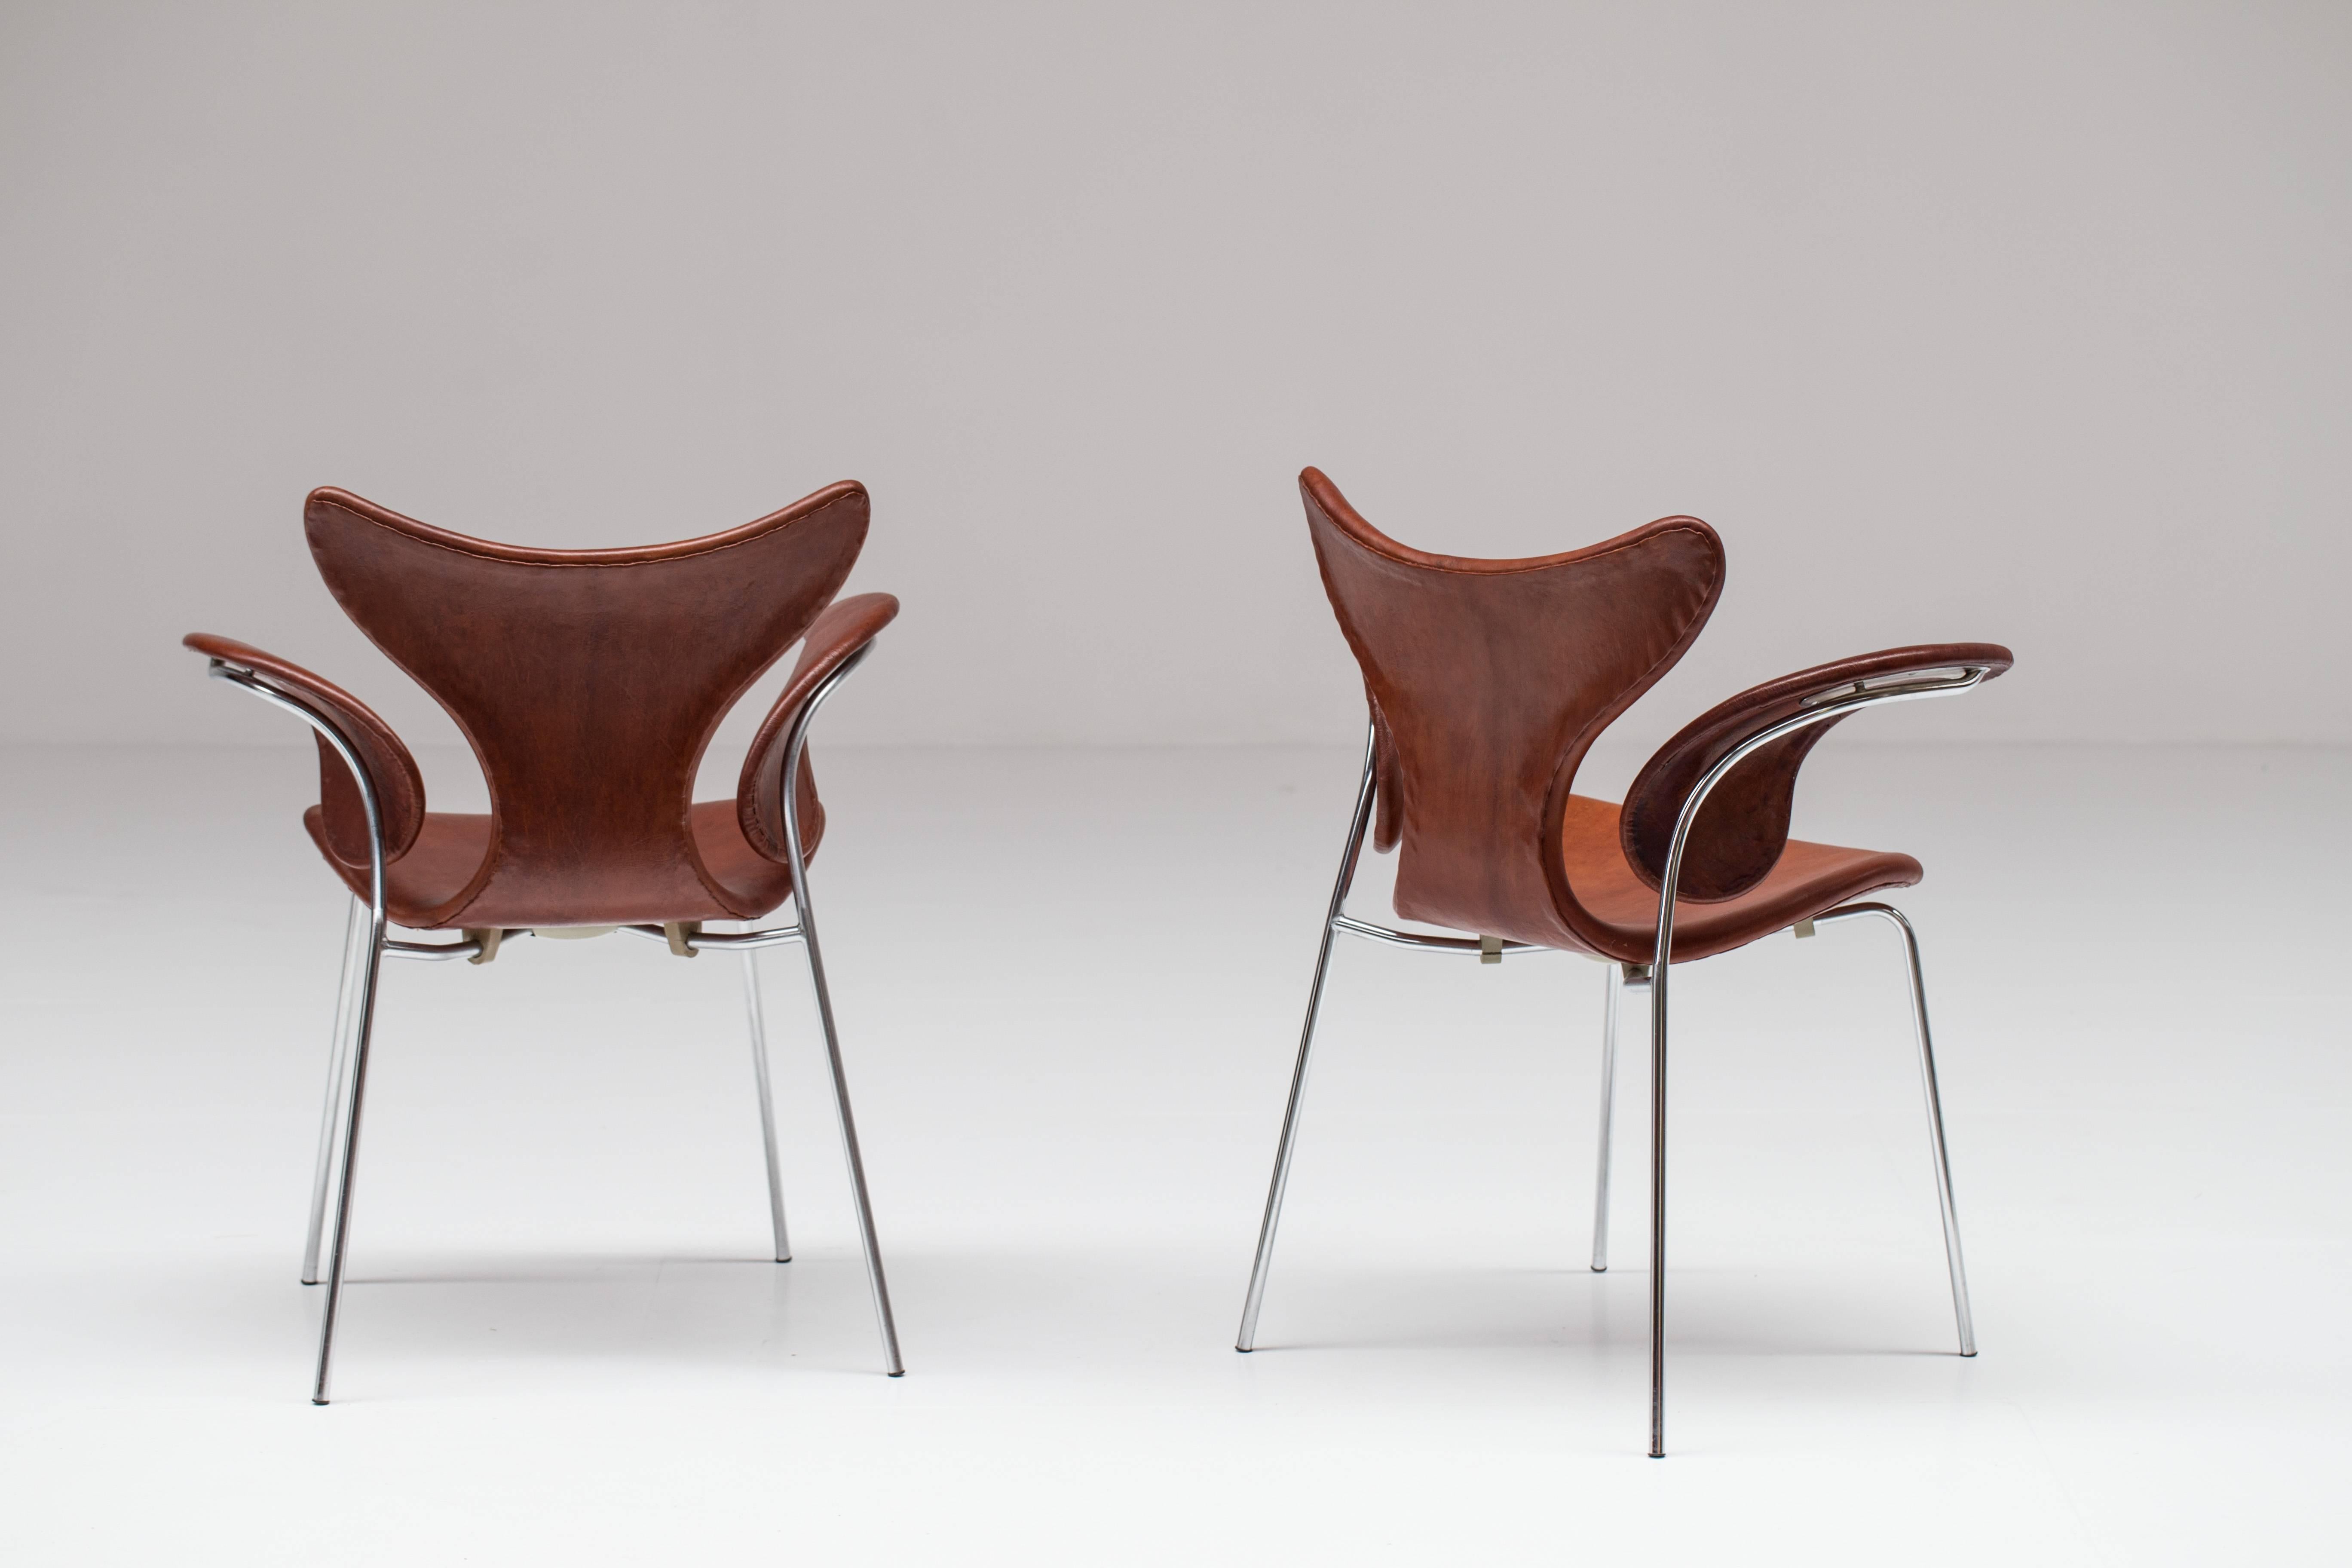 Steel Pair of Leather Seagull Chairs For Sale